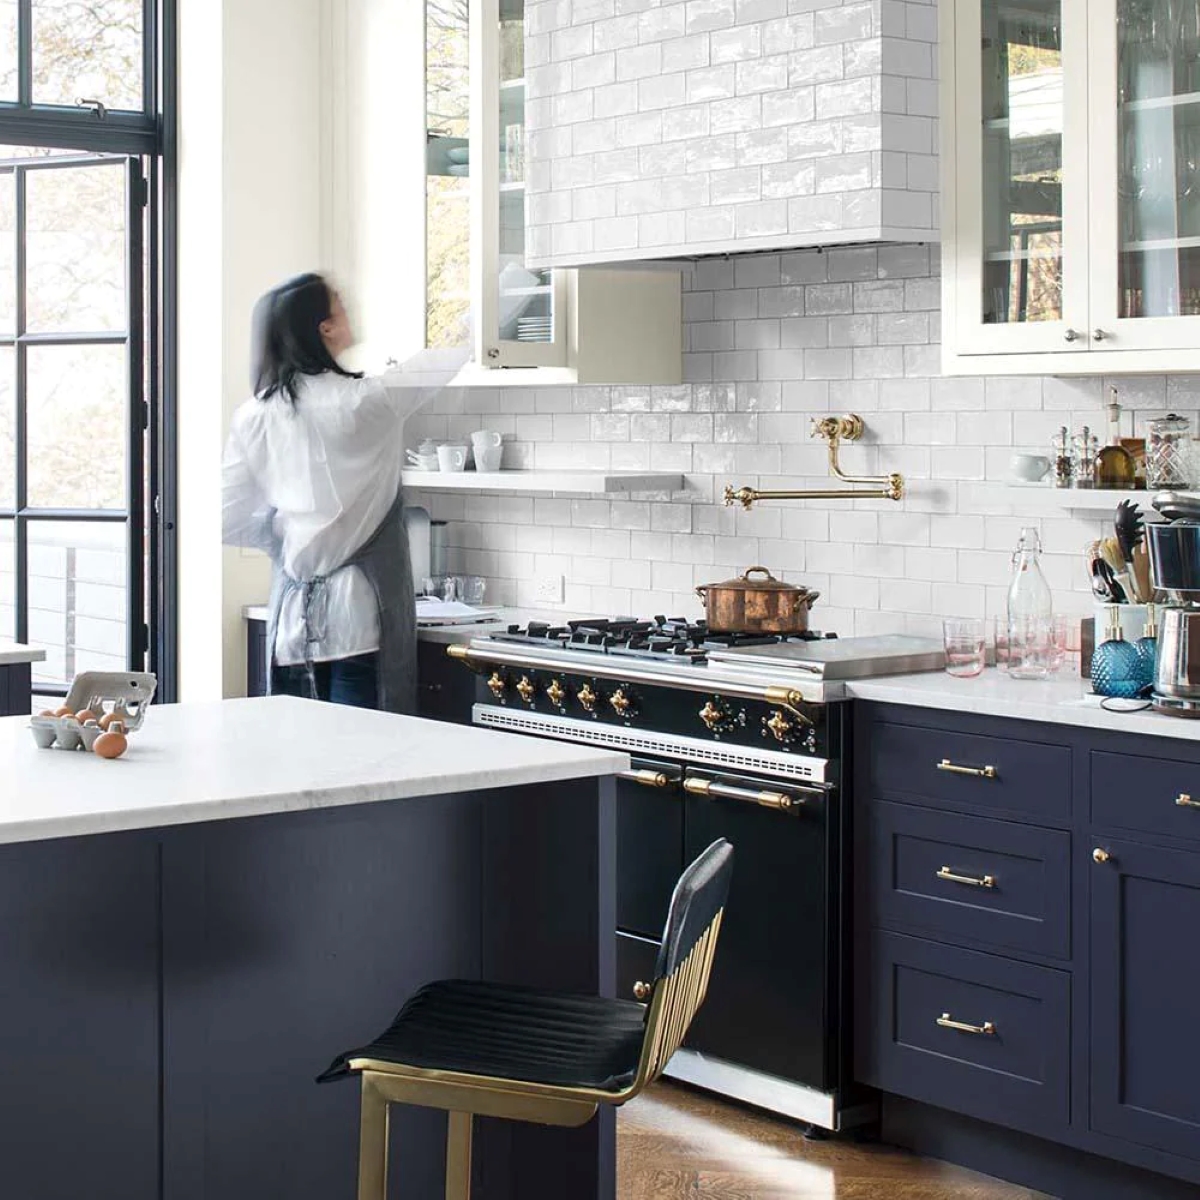 Woman in kitchen with dark blue cabinets.